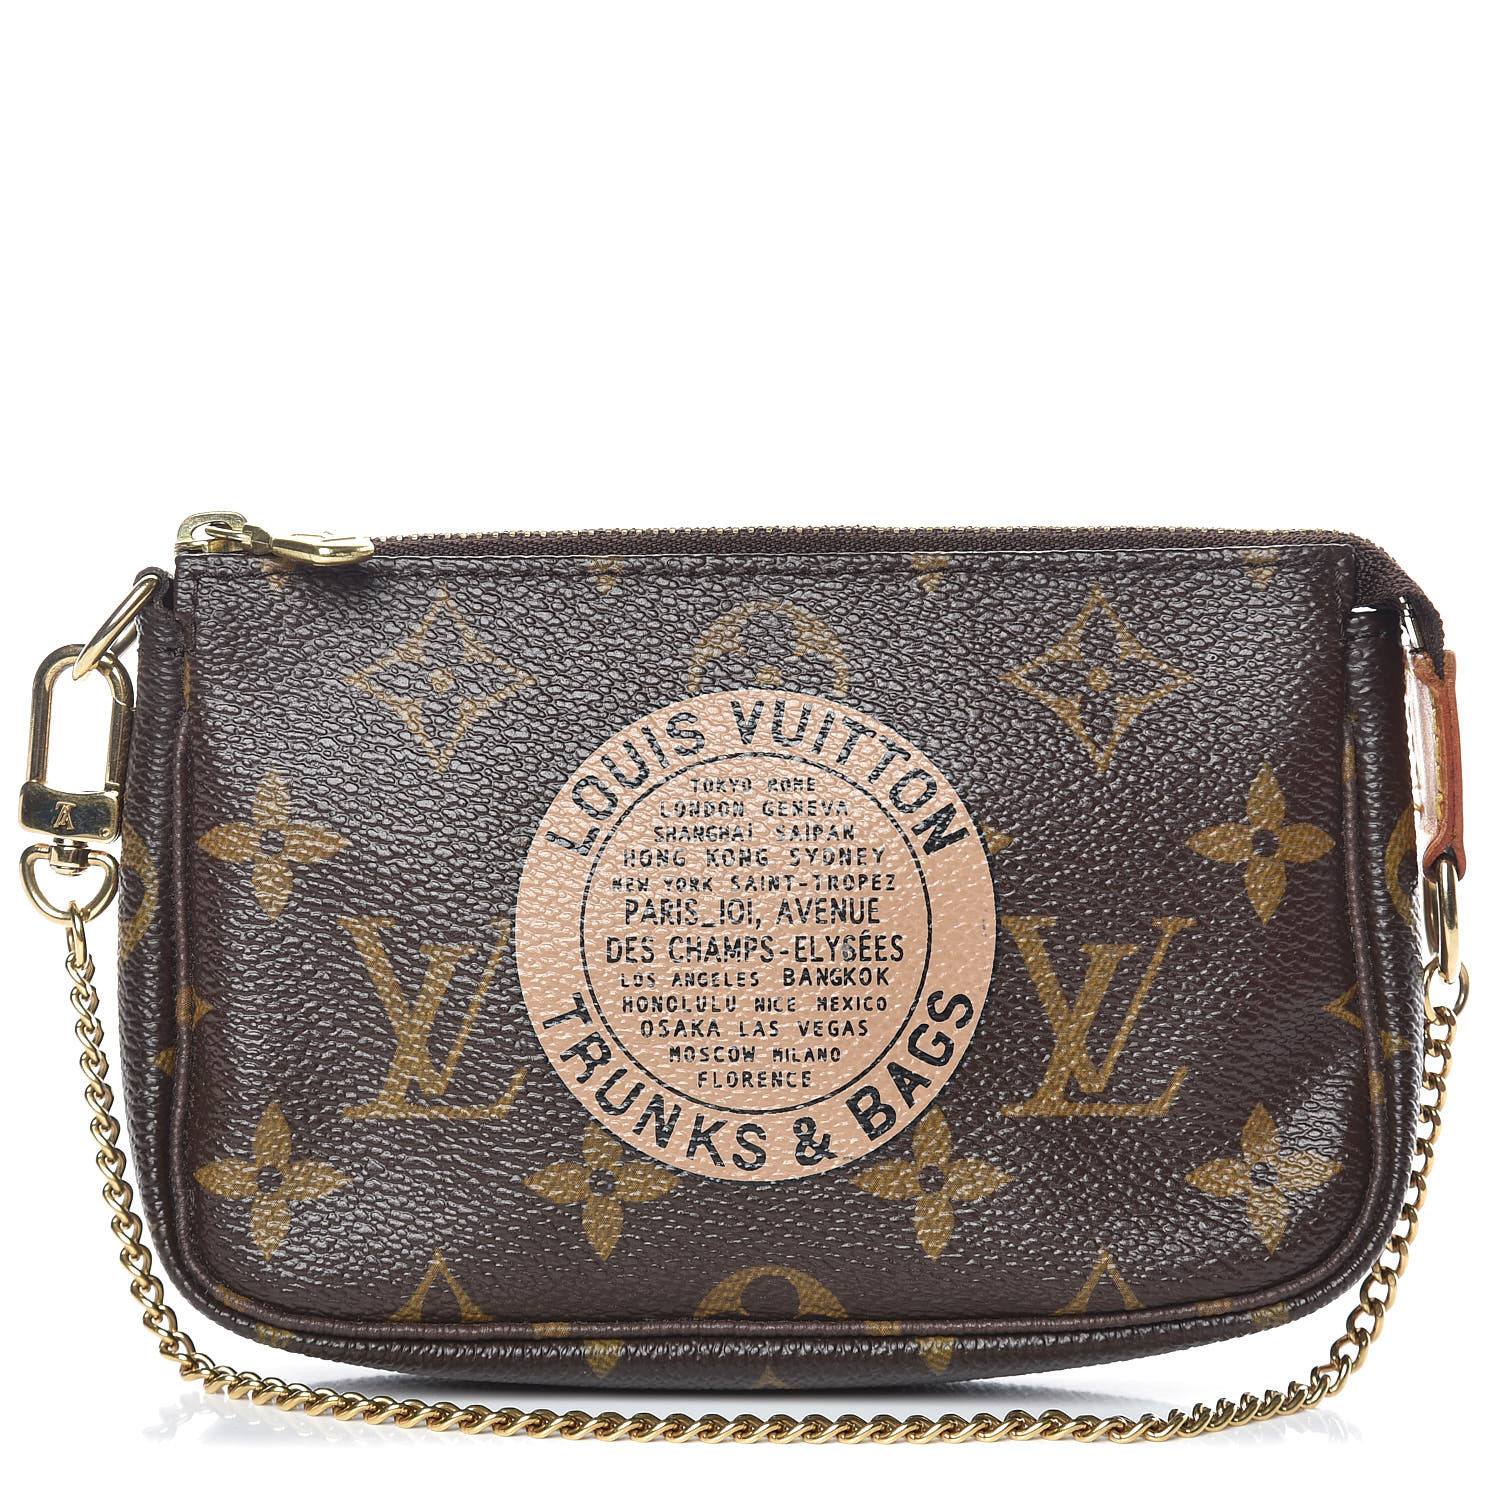 Louis Vuitton Trunks & Bags Limited Edition Pochette in Good -  Hong  Kong